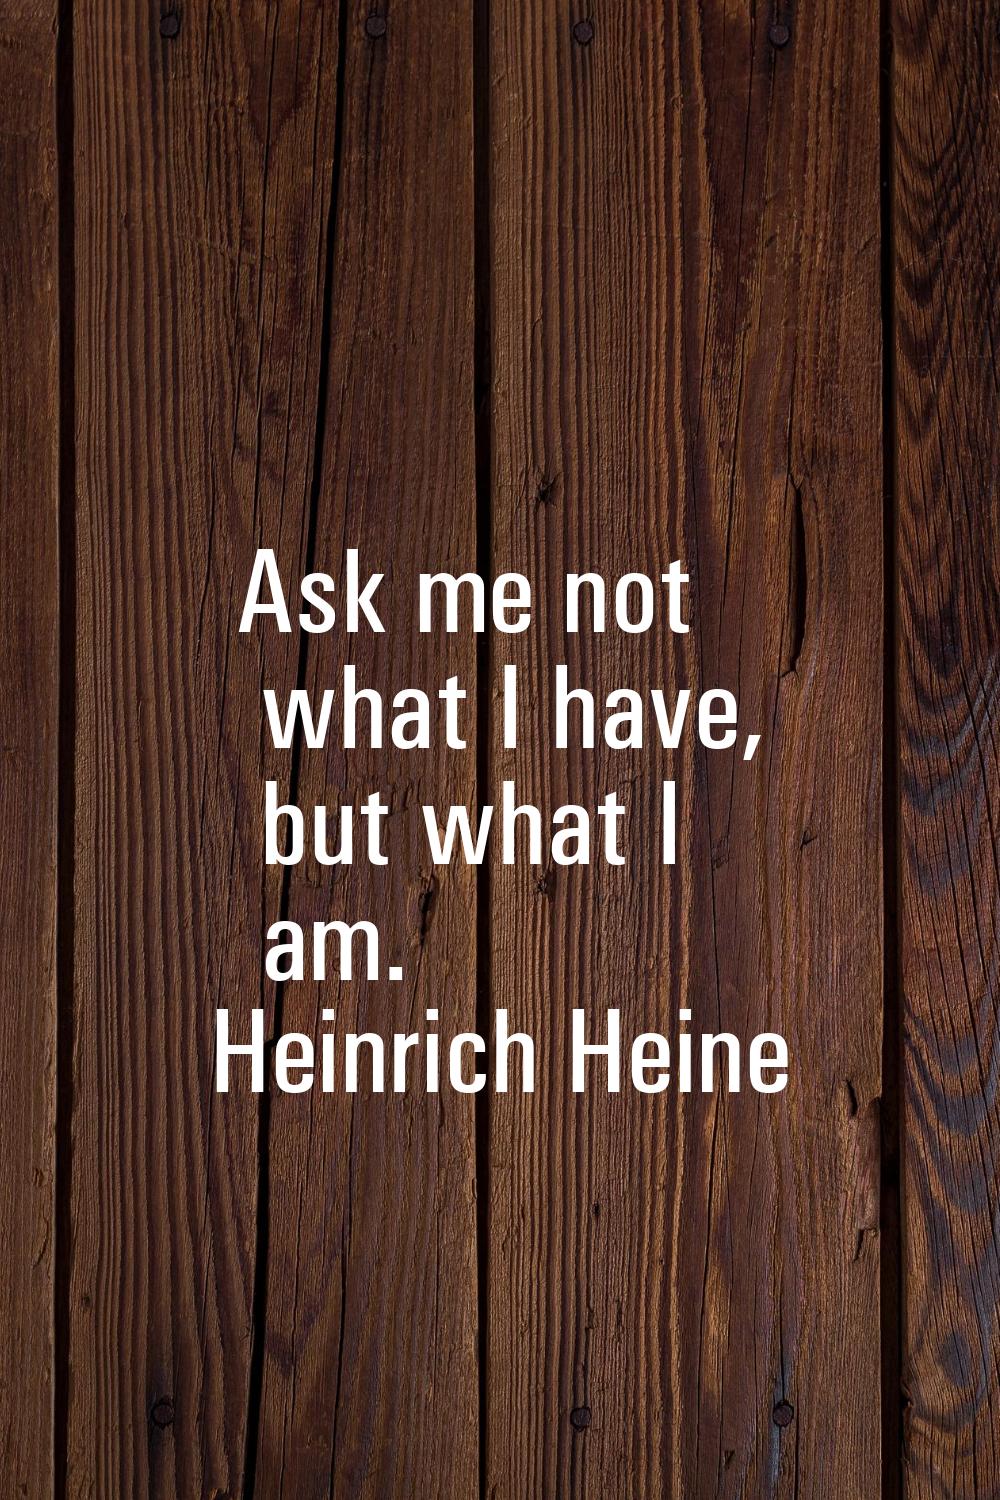 Ask me not what I have, but what I am.